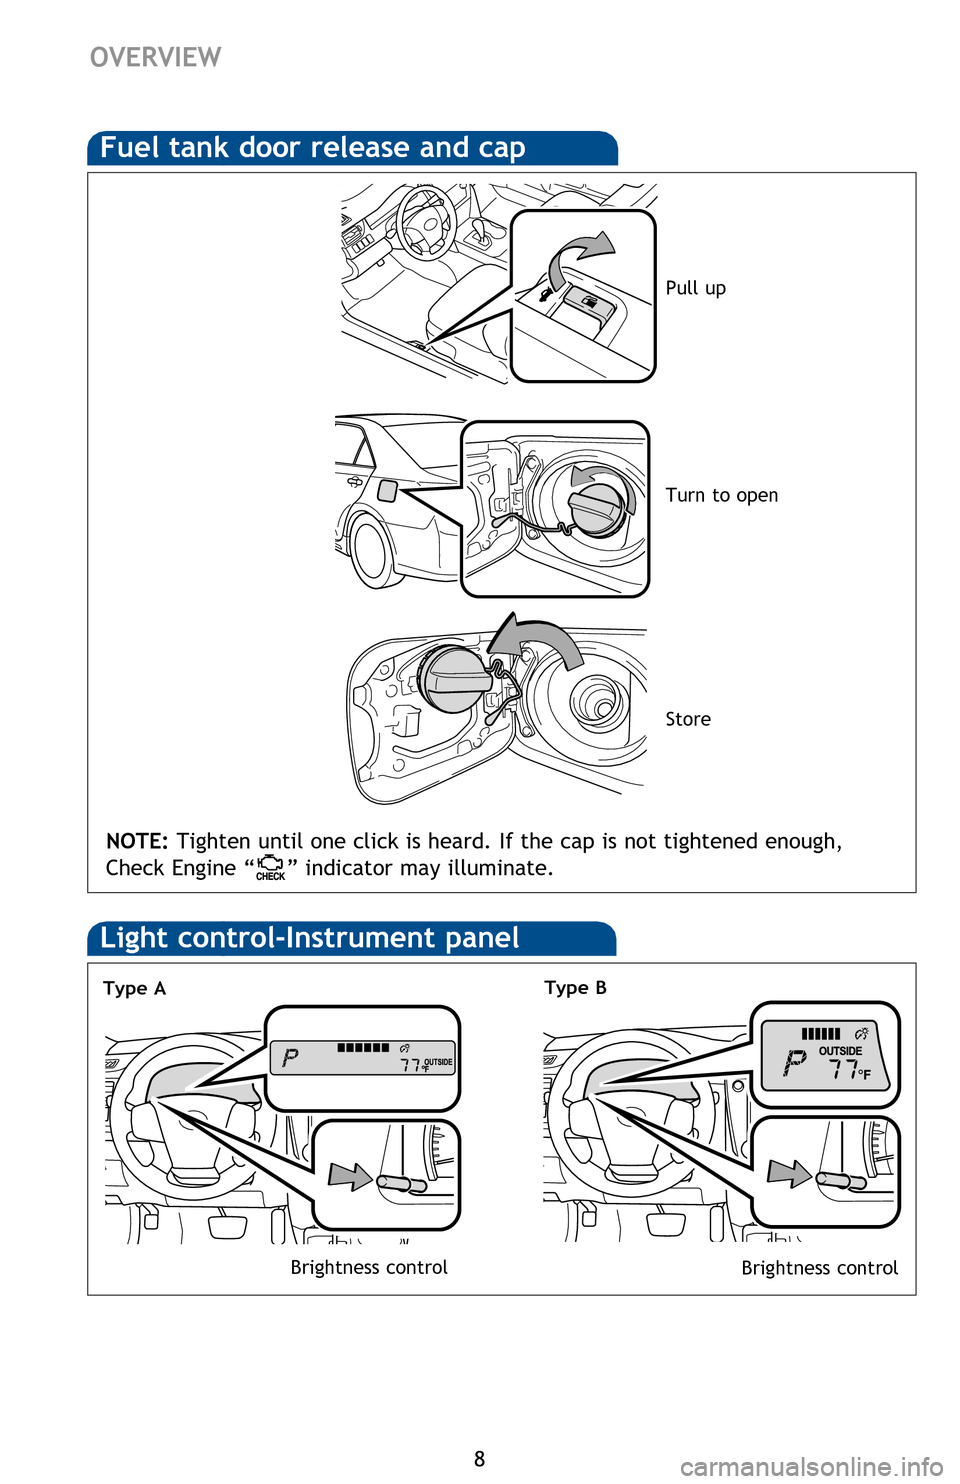 TOYOTA CAMRY 2013 XV50 / 9.G Quick Reference Guide 8
Hood releaseFuel tank door release and cap
NOTE: Tighten until one click is heard. If the cap is not tightened enough, 
Check Engine “
” indicator may illuminate.
Pull up
Turn to open
Store
Engi